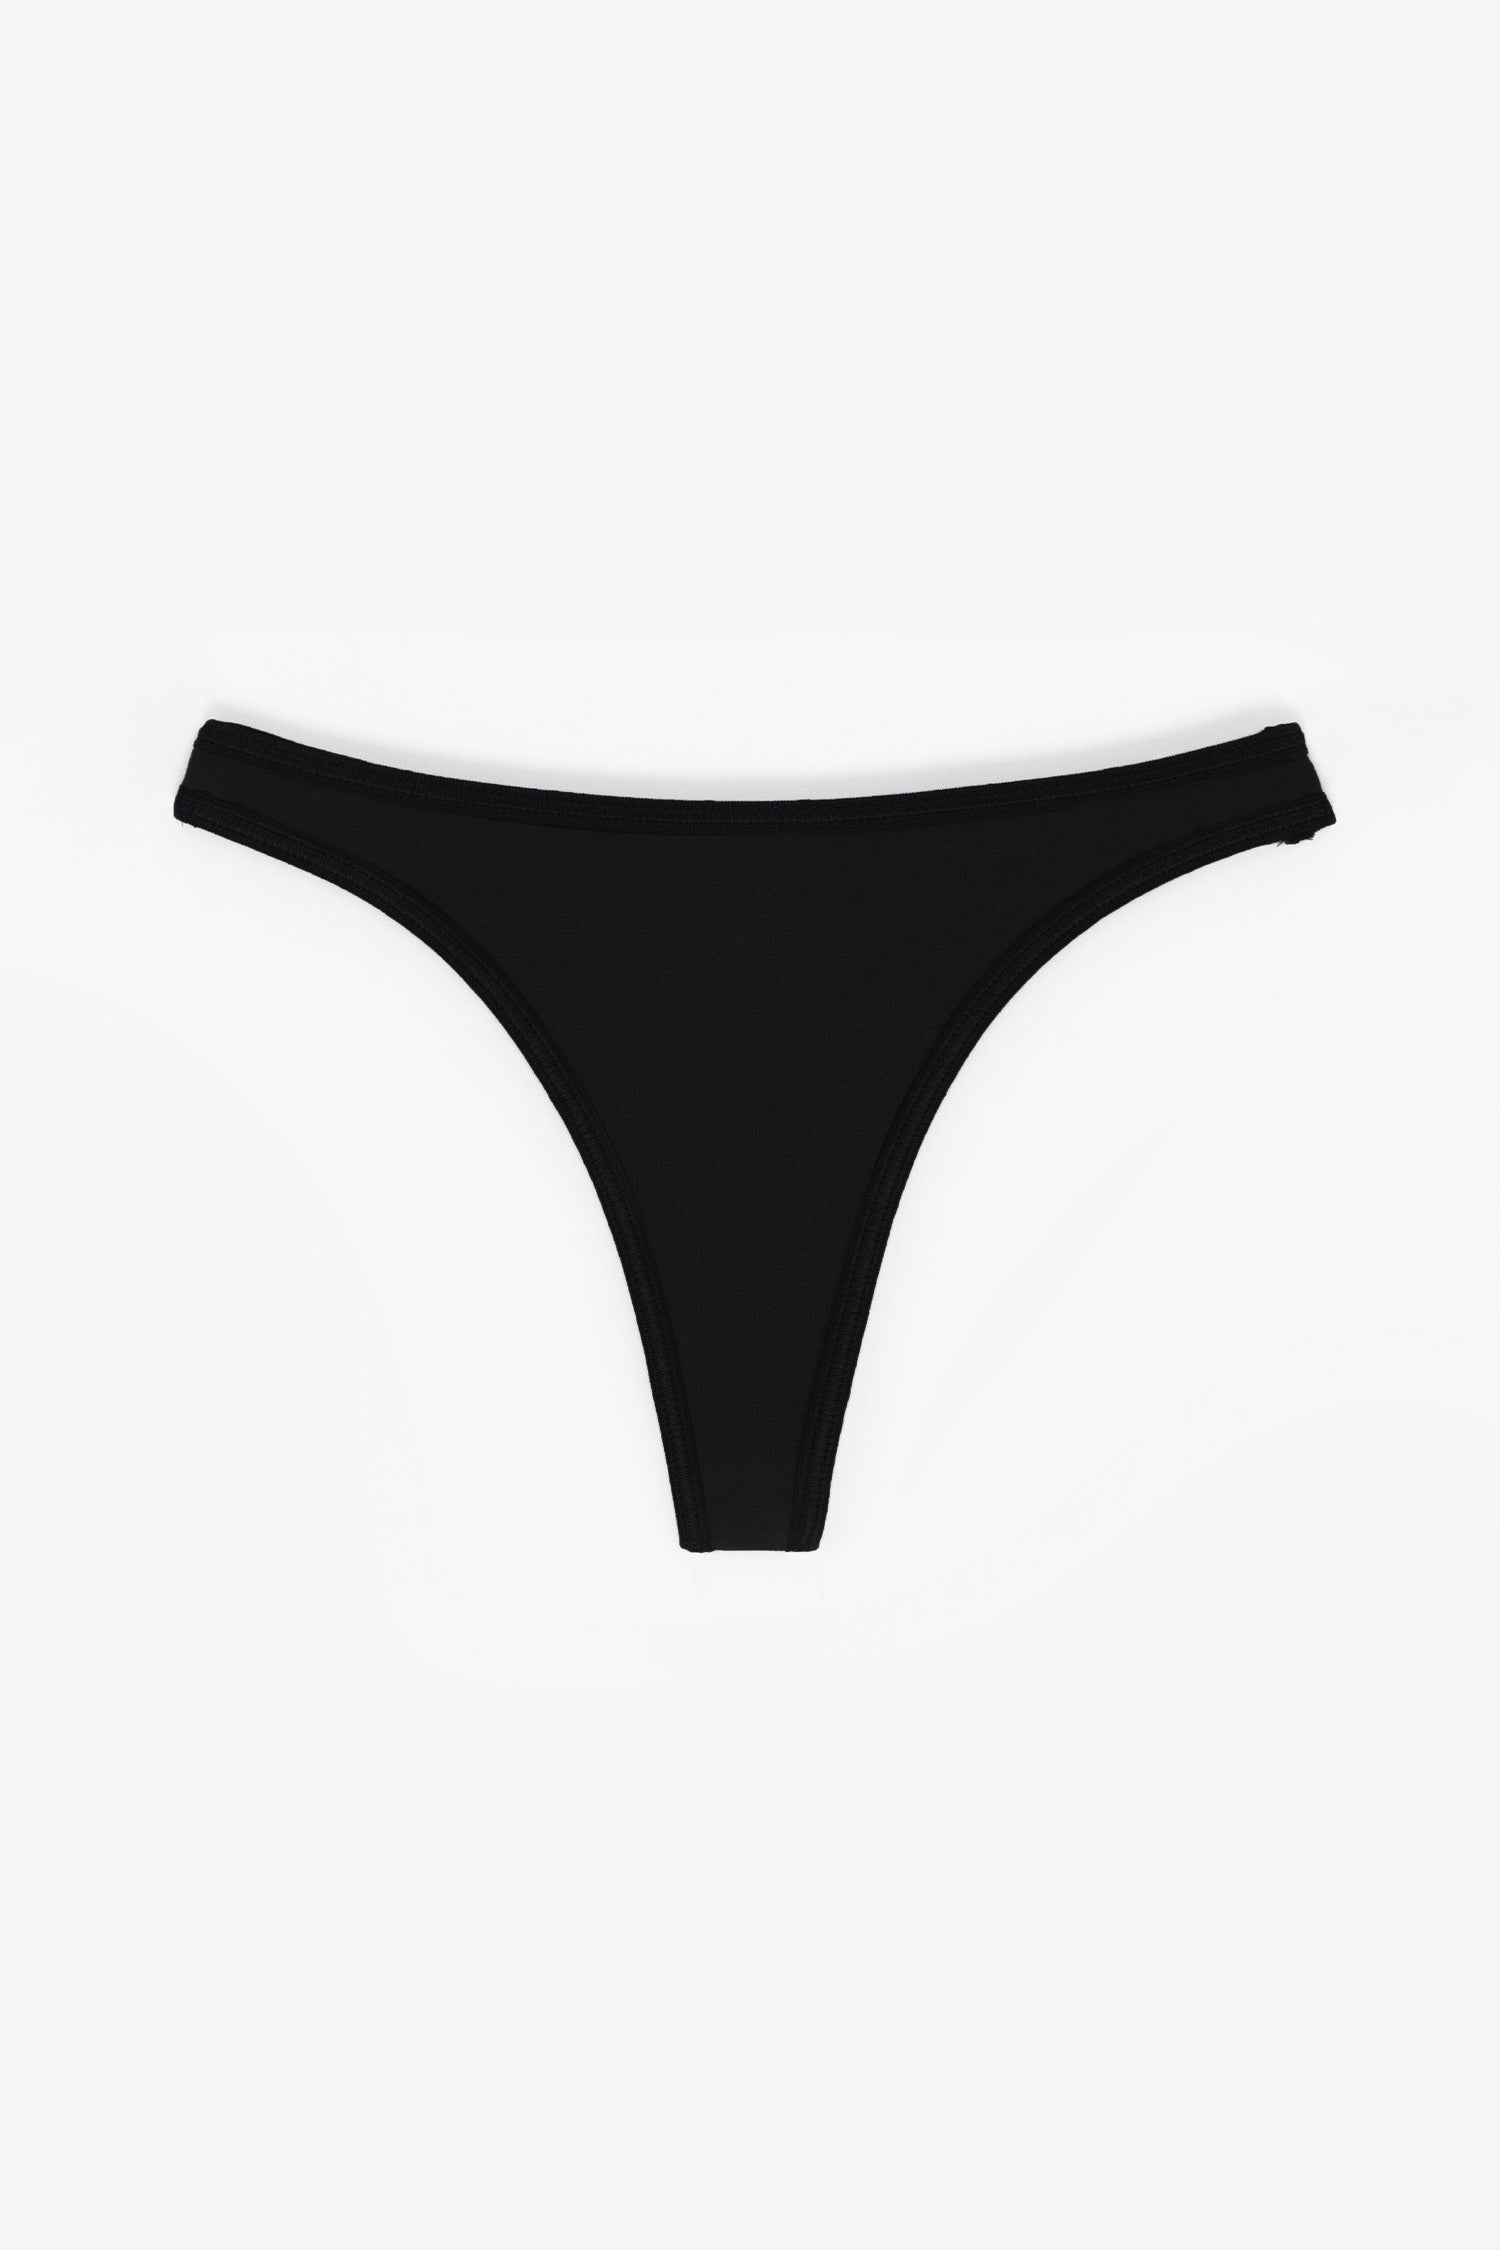 Thong - Mineral Undies – The Truth Beauty Company